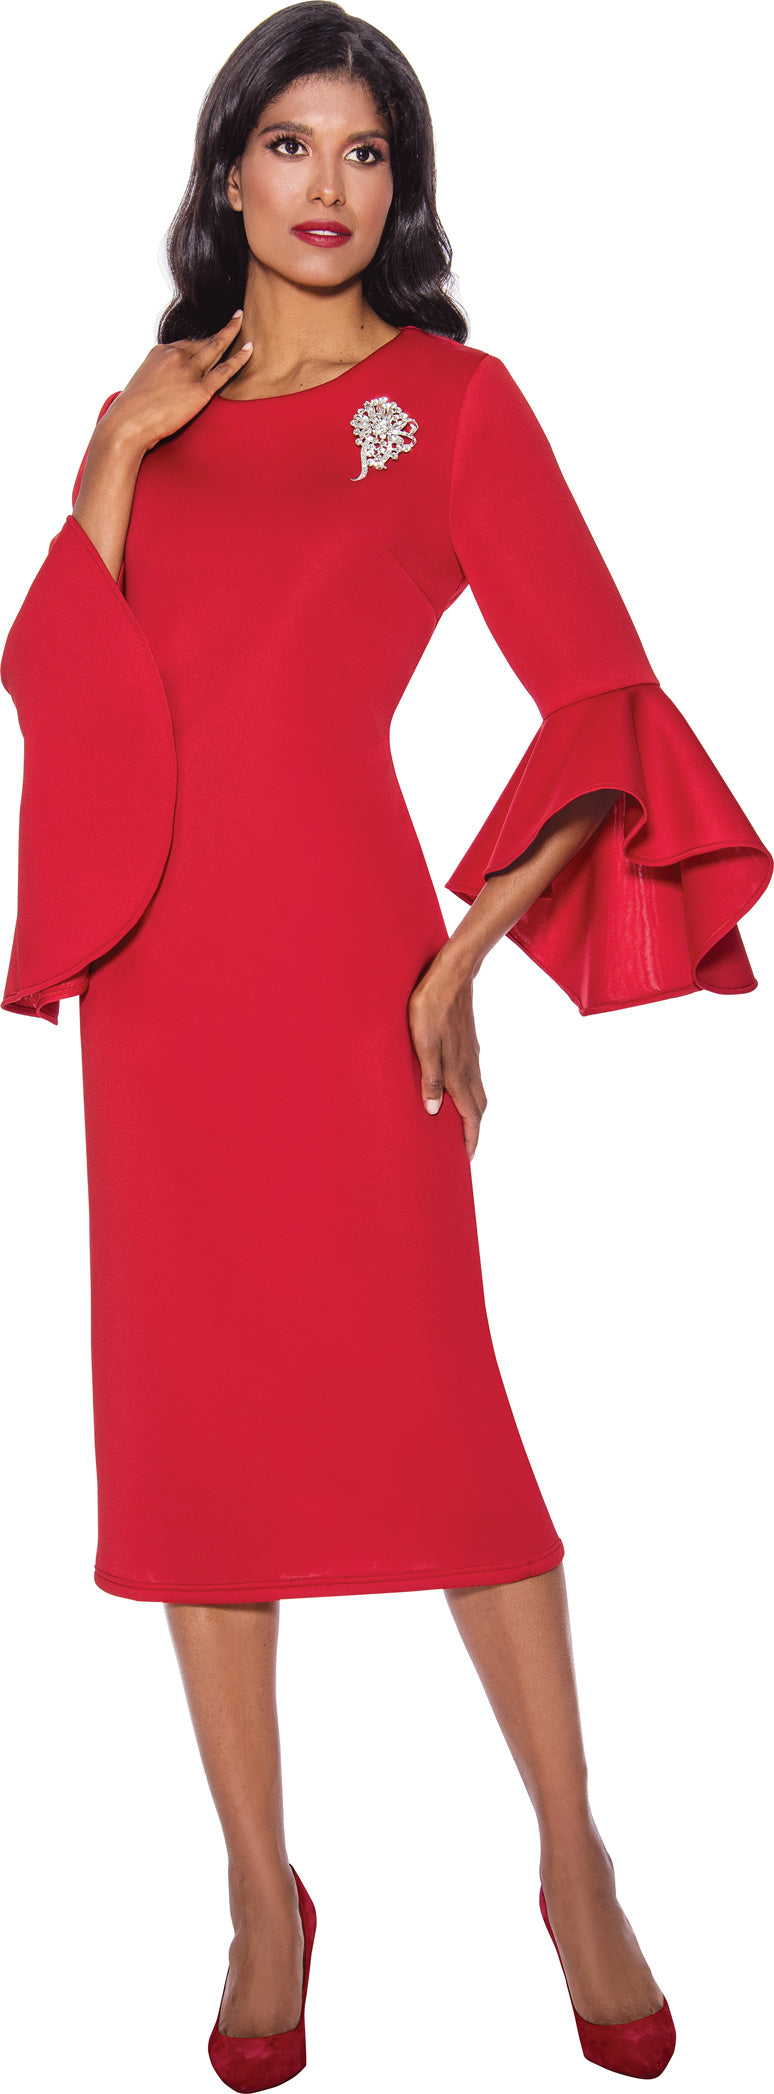 Plus Size Dresses Mother of the Bride Cocktail Midi Dress Red